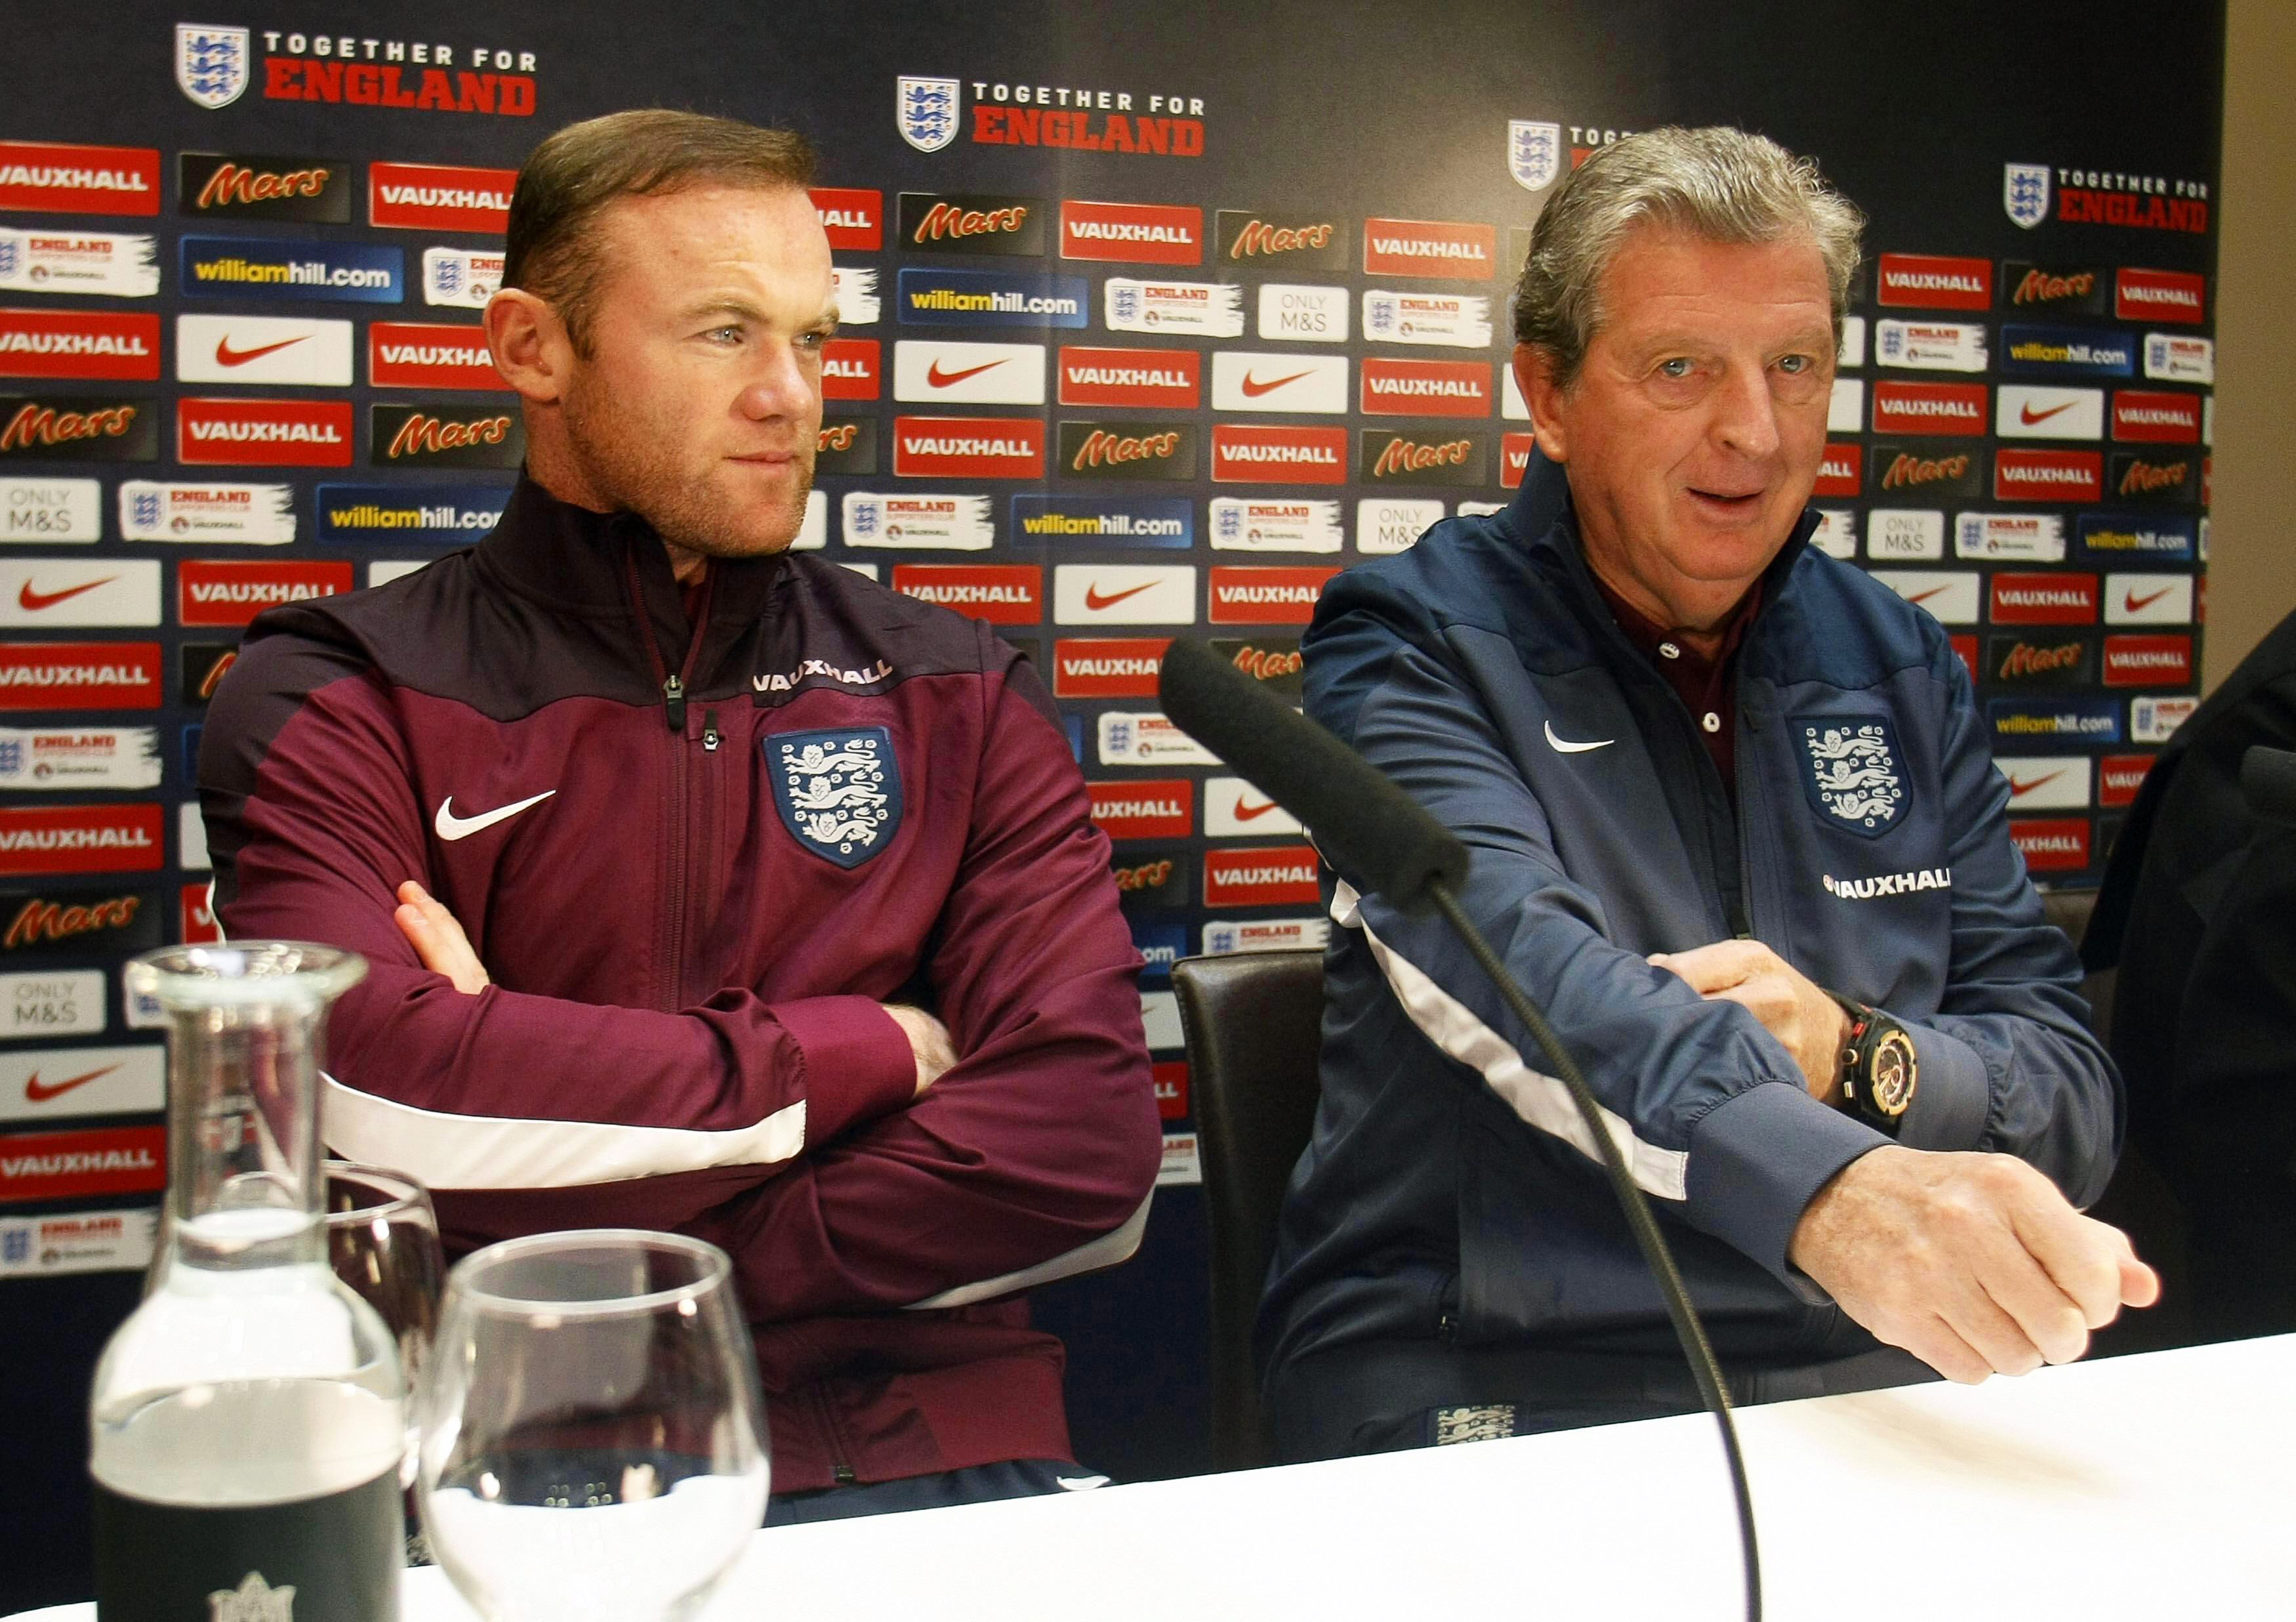 England manager Roy Hodgson (R) and Wayne Rooney (L) attend a press conference in Alicante, eastern Spain, 12 November 2015. (Photo by Morell/EPA)